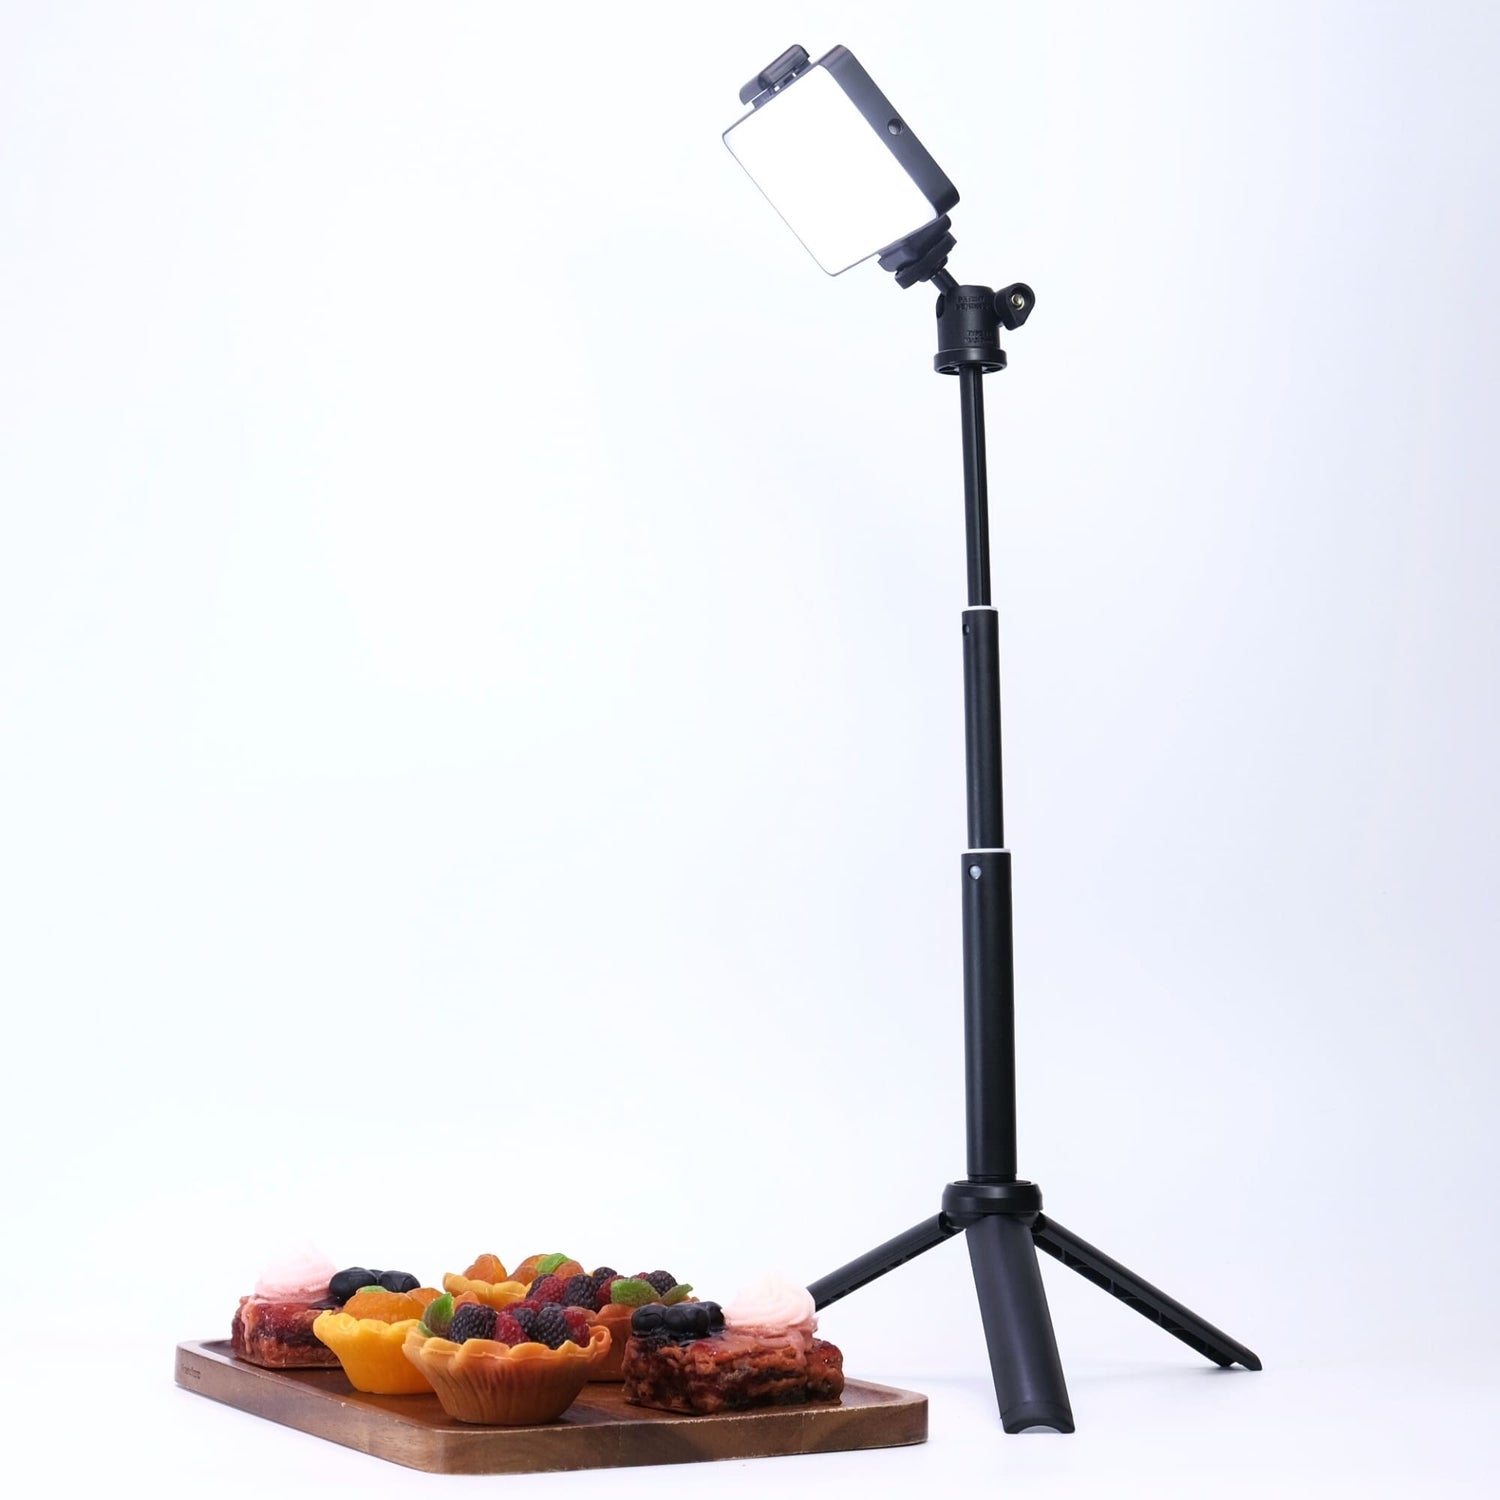 Home studio lighting for product photos and videos